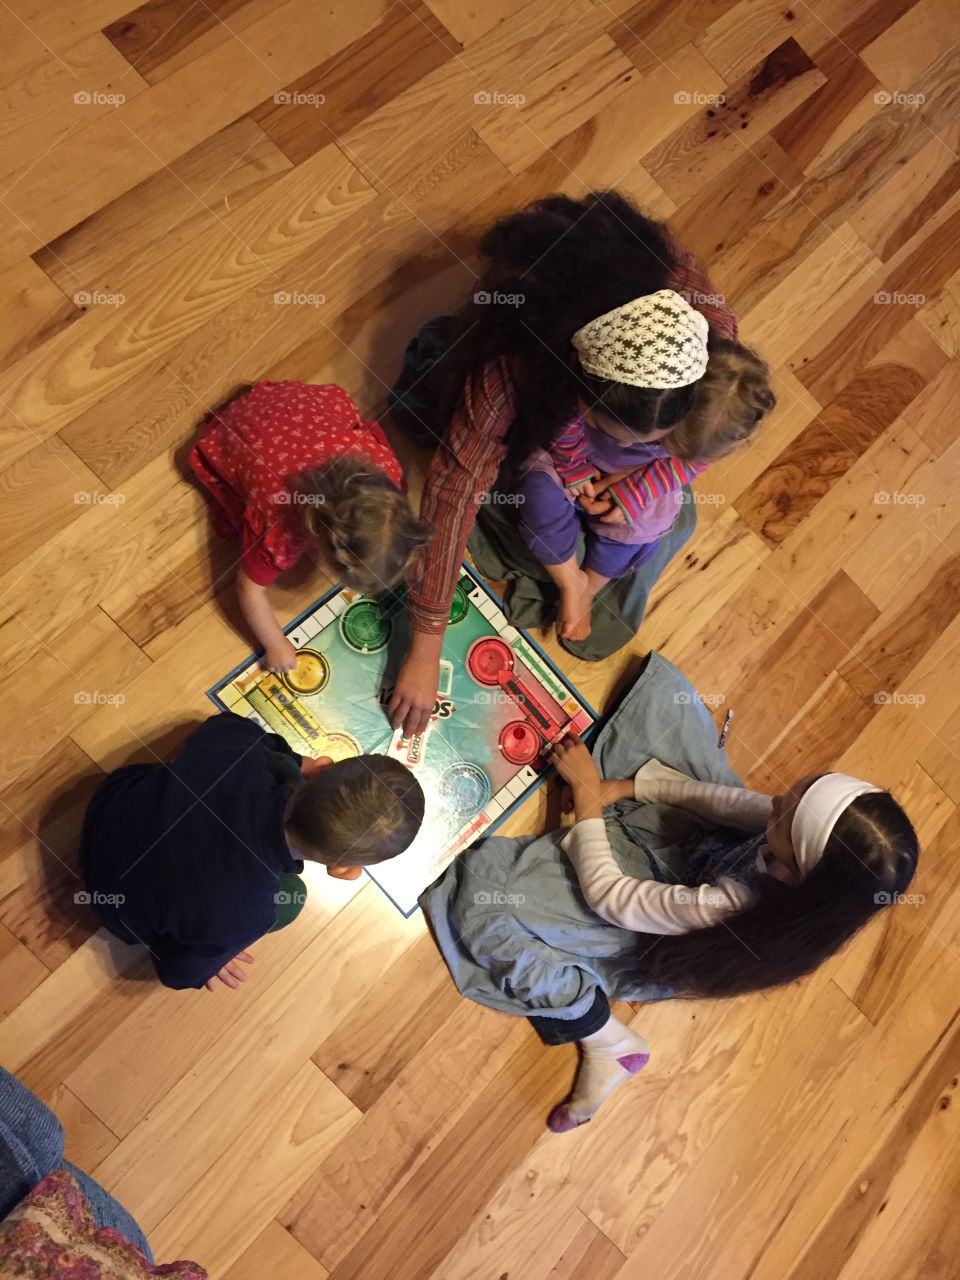 This is a picture taken of some children playing a game on the floor in the house.